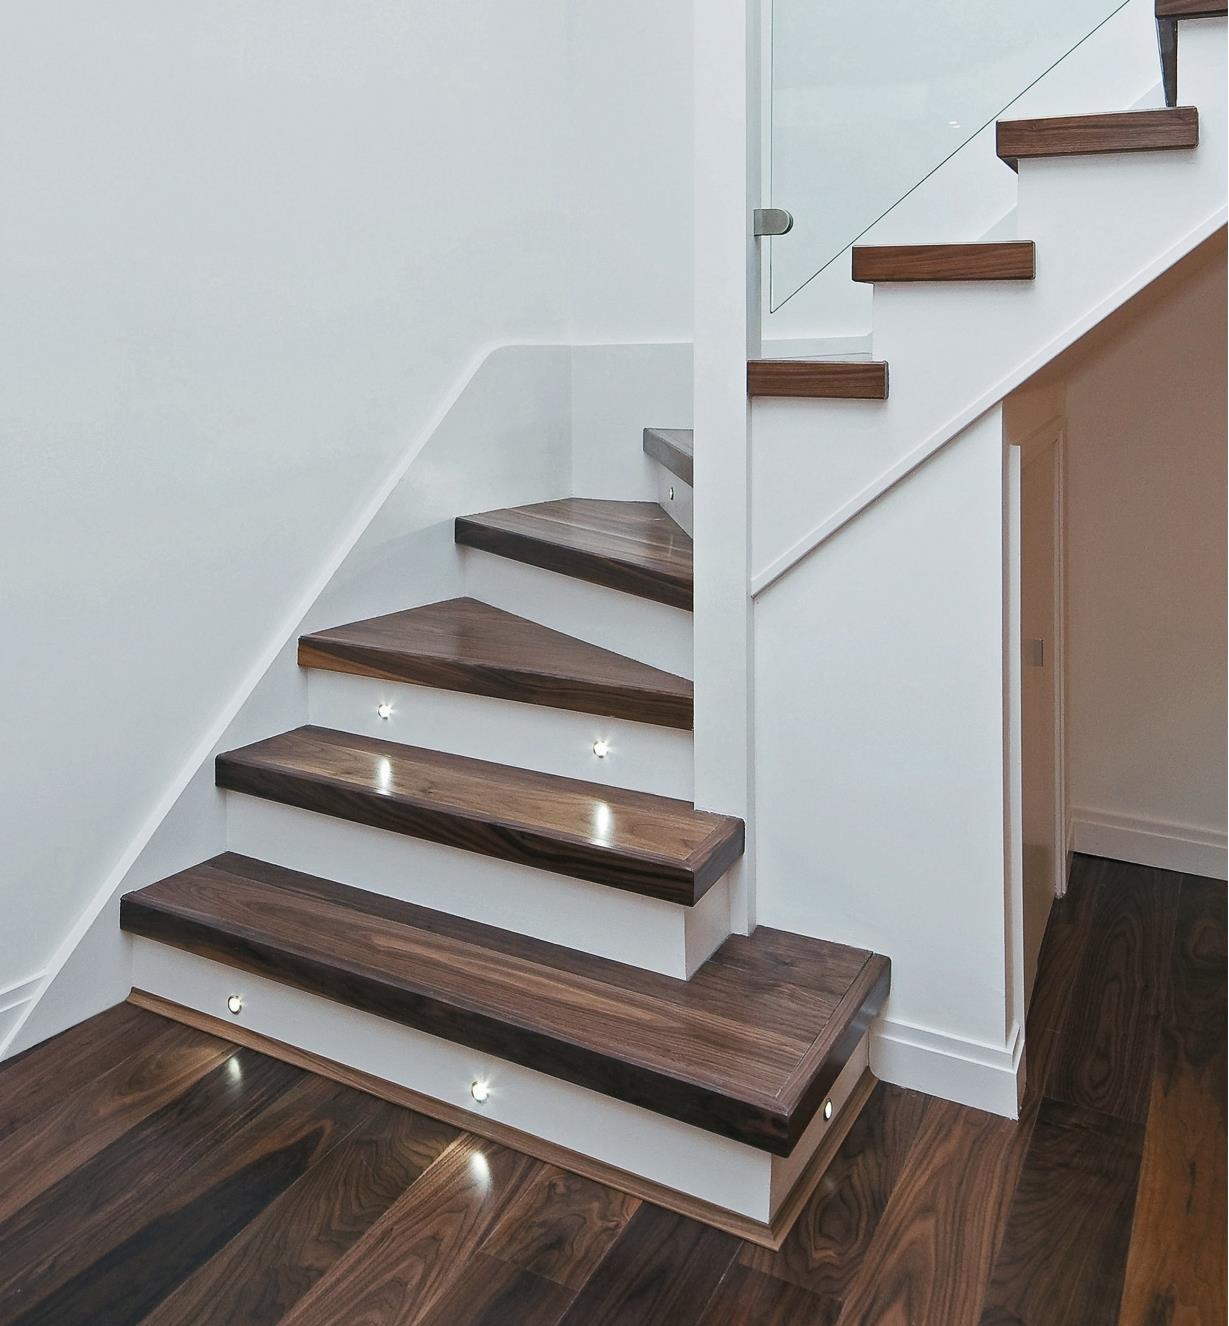 Example of Mini Recessed LED Lights installed in stairs